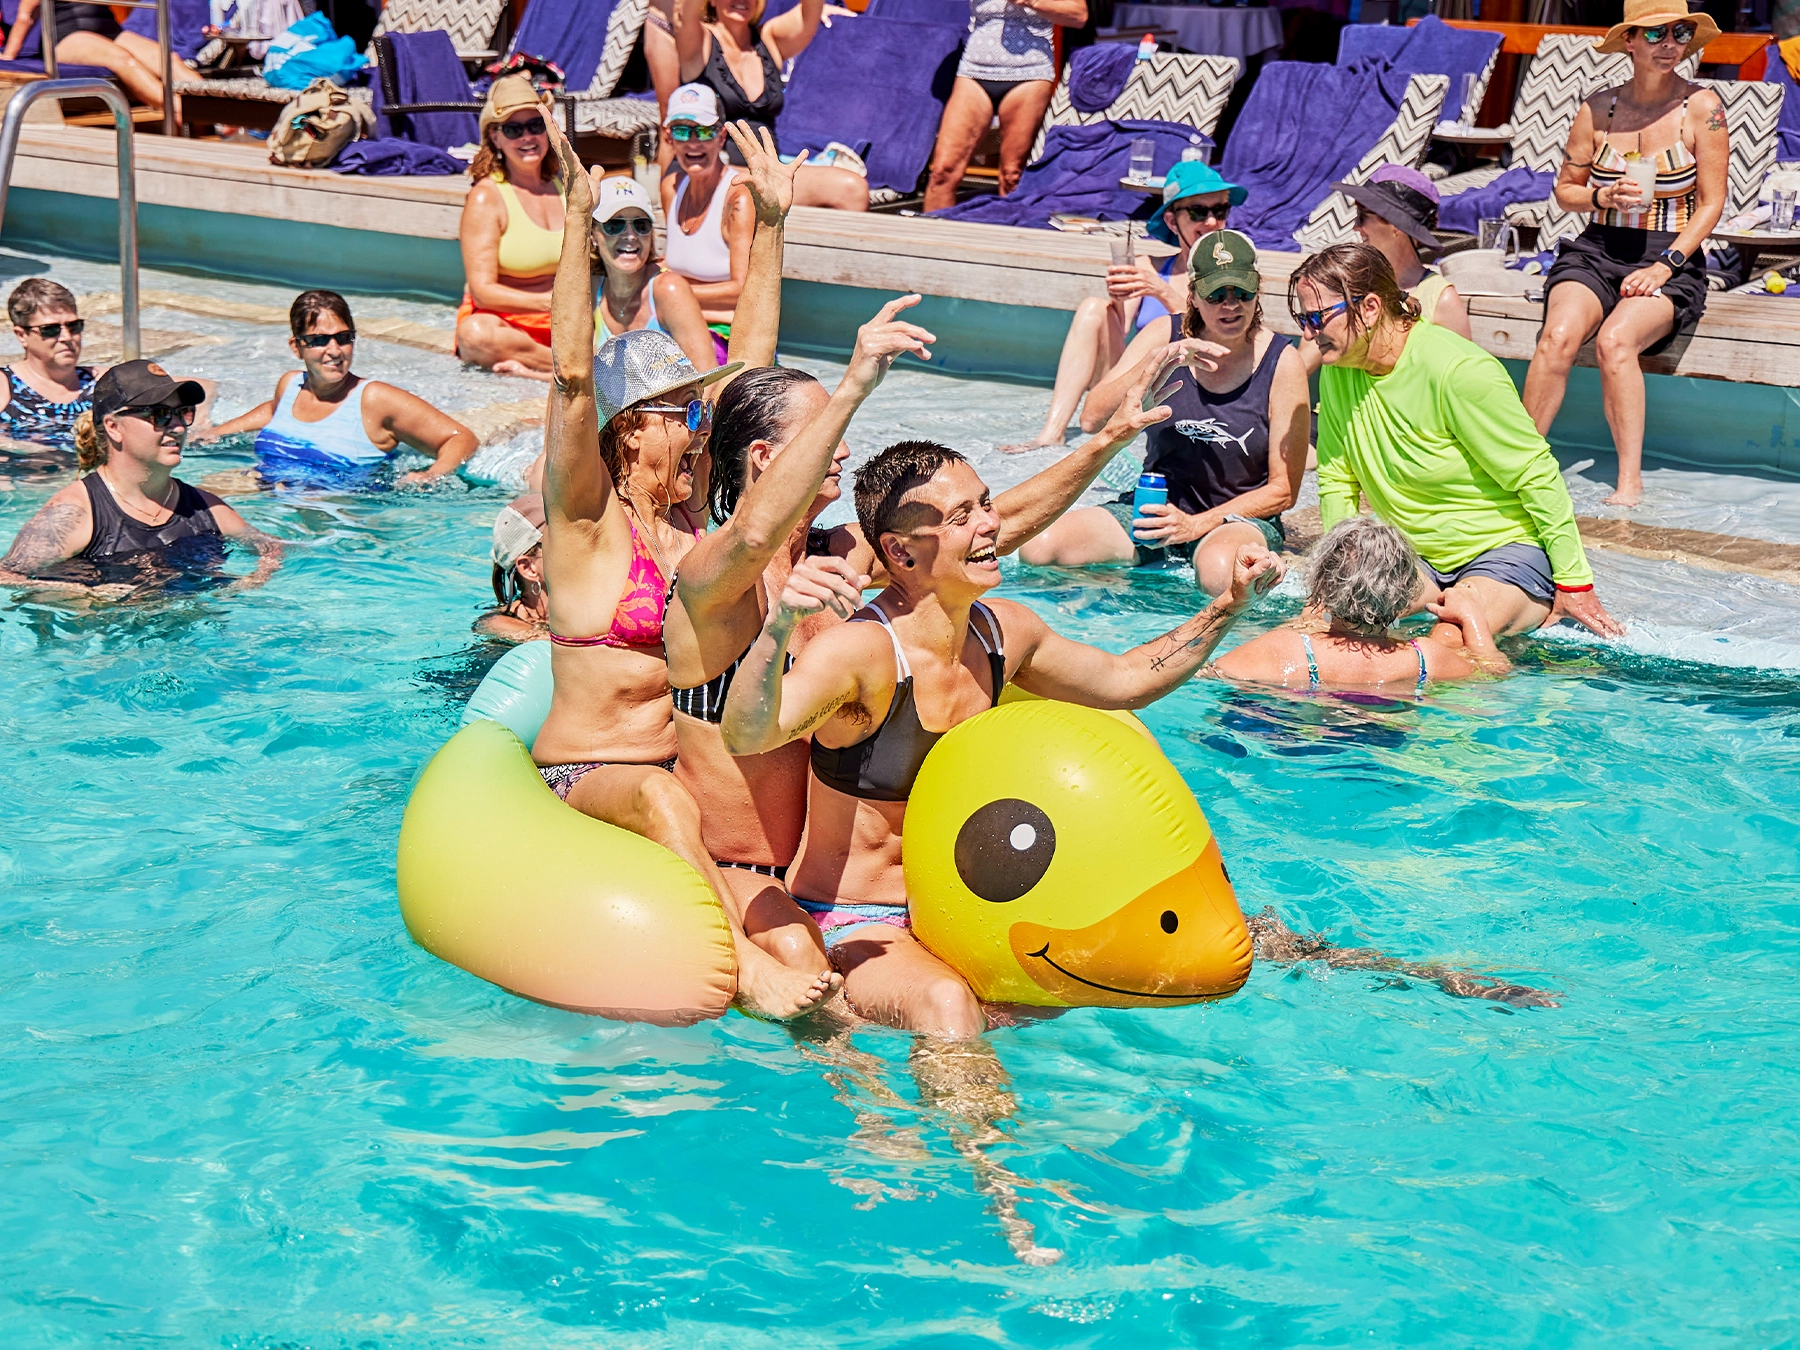 women enjoy themselves at the pool on an Olivia cruise